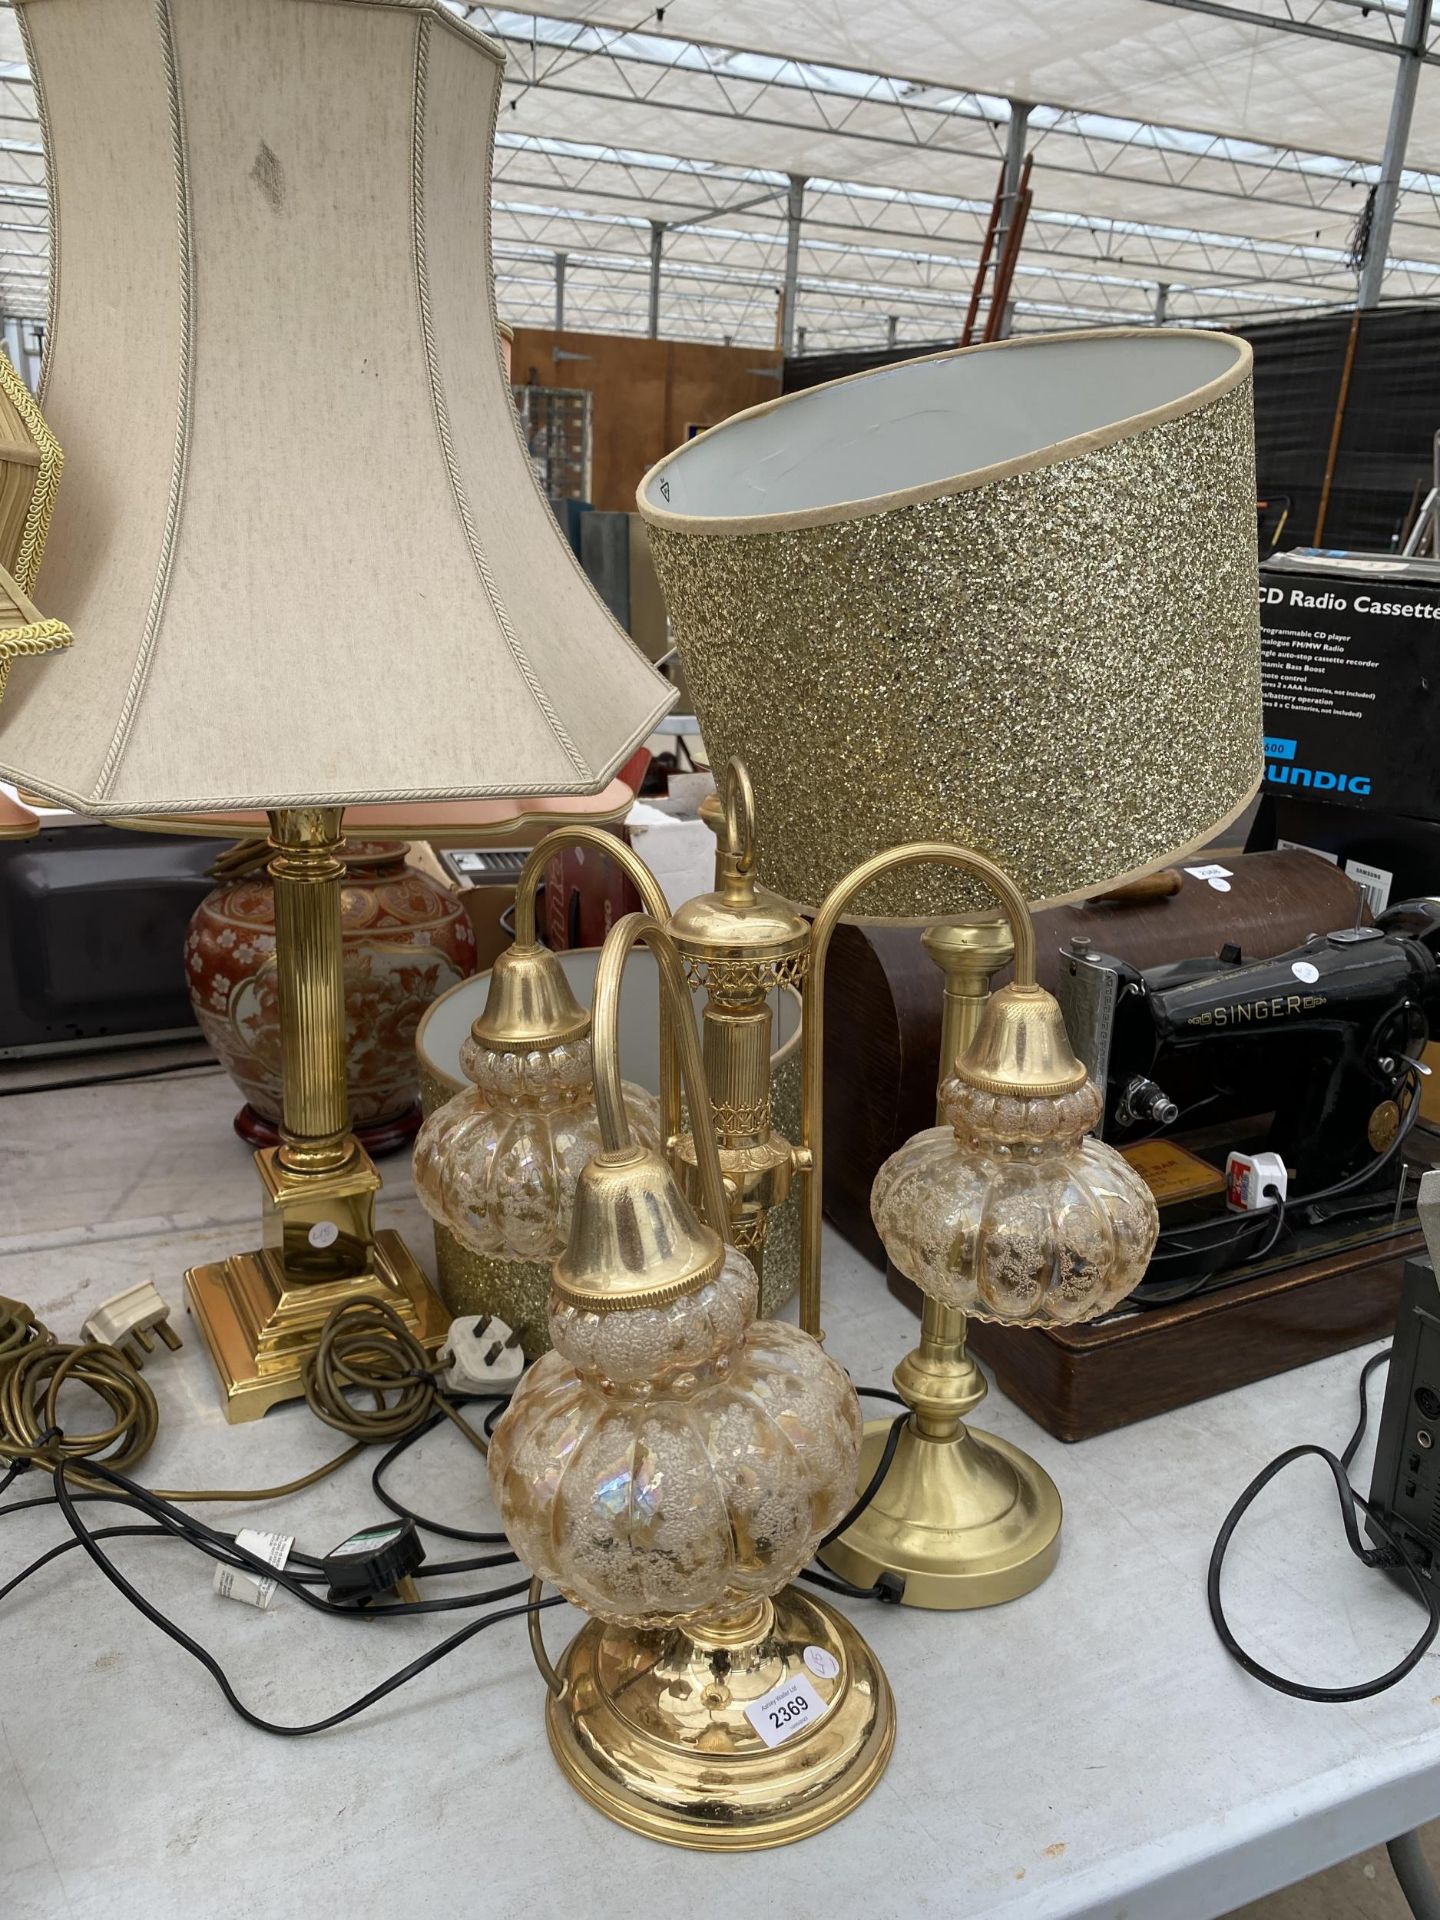 TWO DECORATIVE TABLE LAMPS